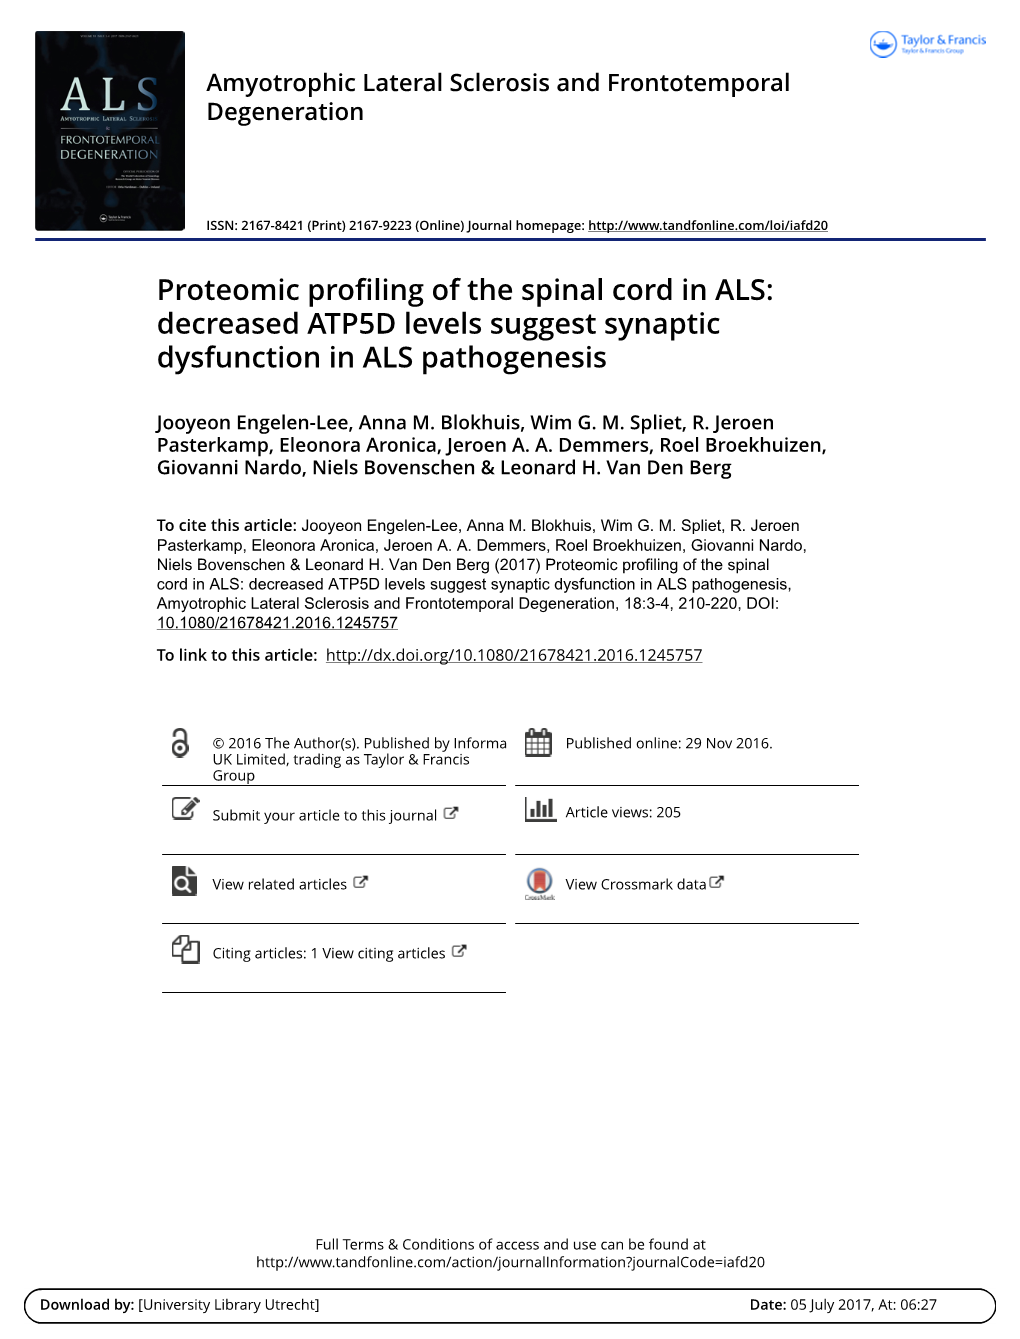 Proteomic Profiling of the Spinal Cord in ALS: Decreased ATP5D Levels Suggest Synaptic Dysfunction in ALS Pathogenesis